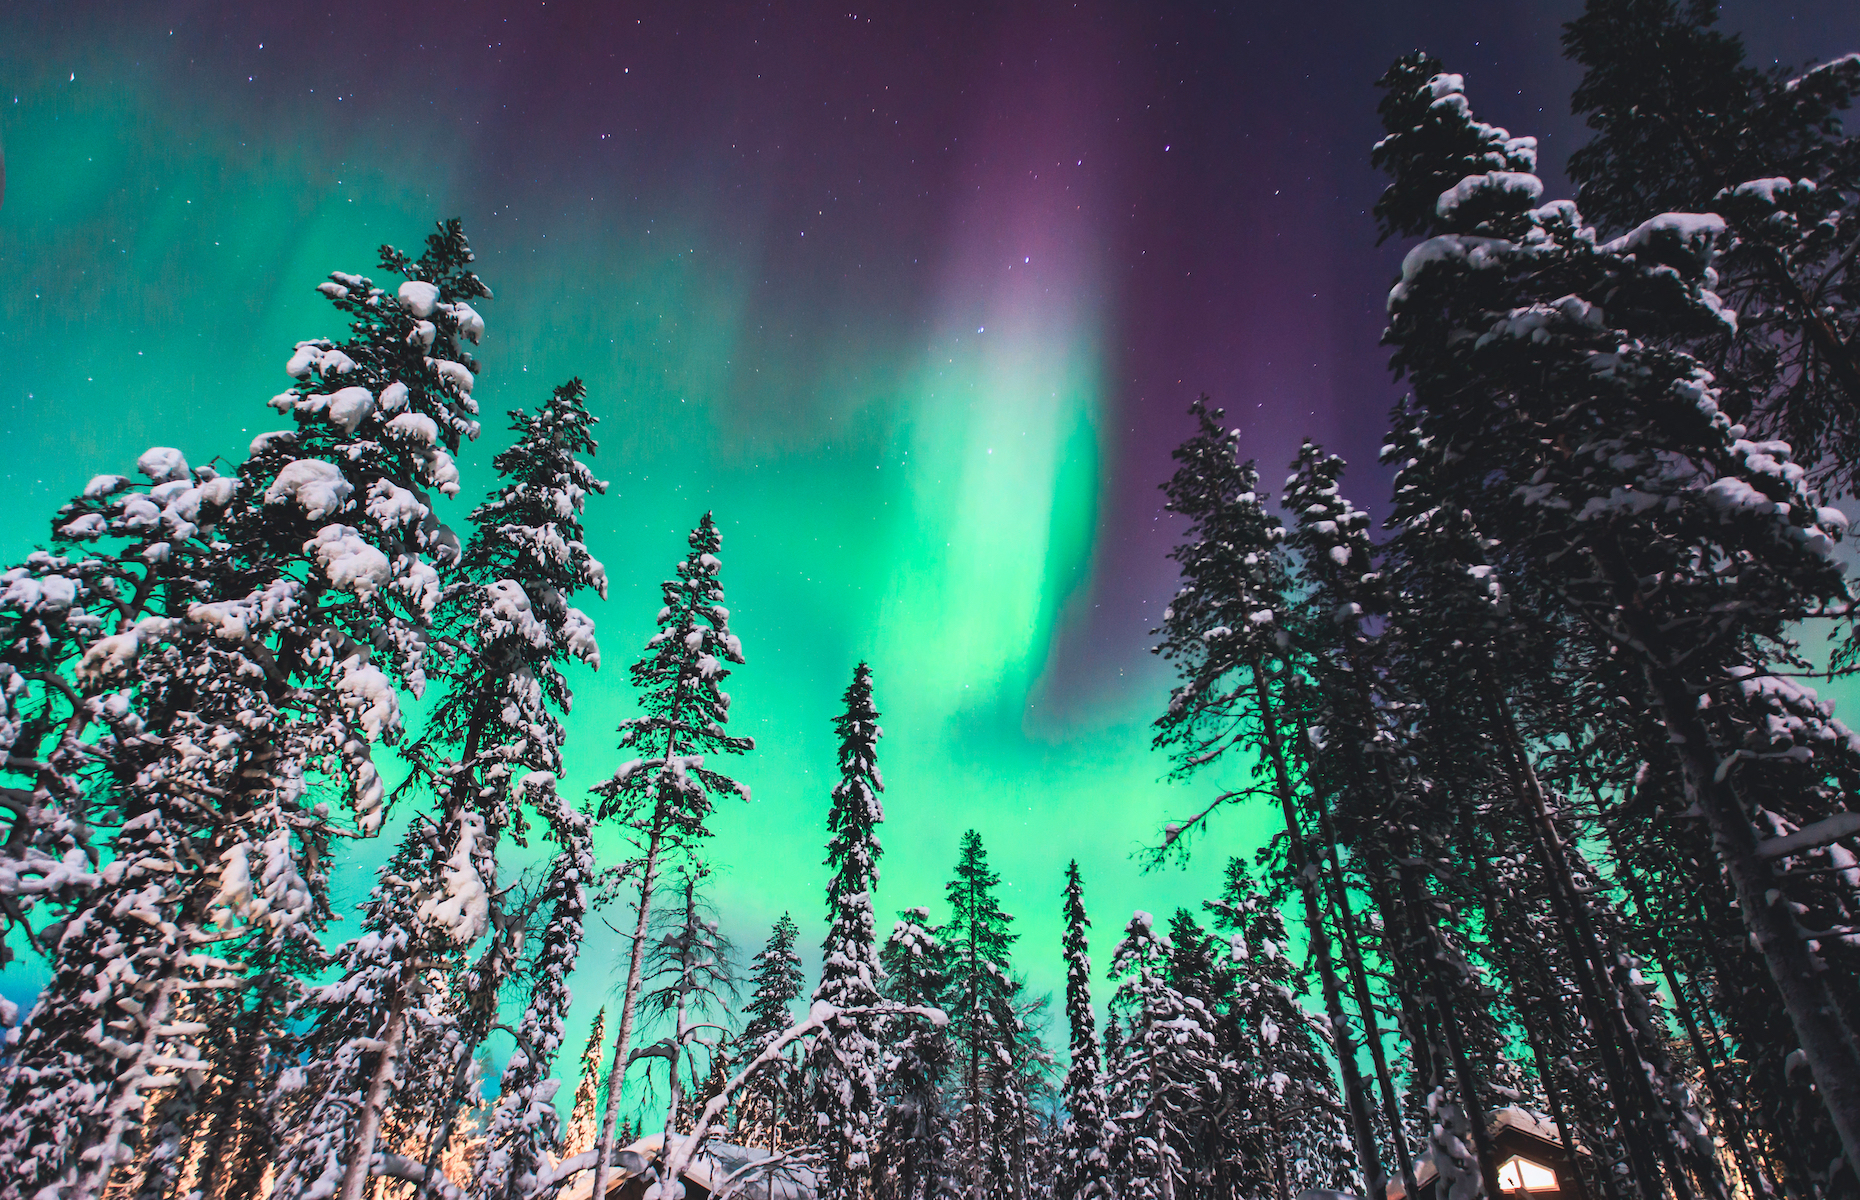 Earth is the only planet that has polar lights.